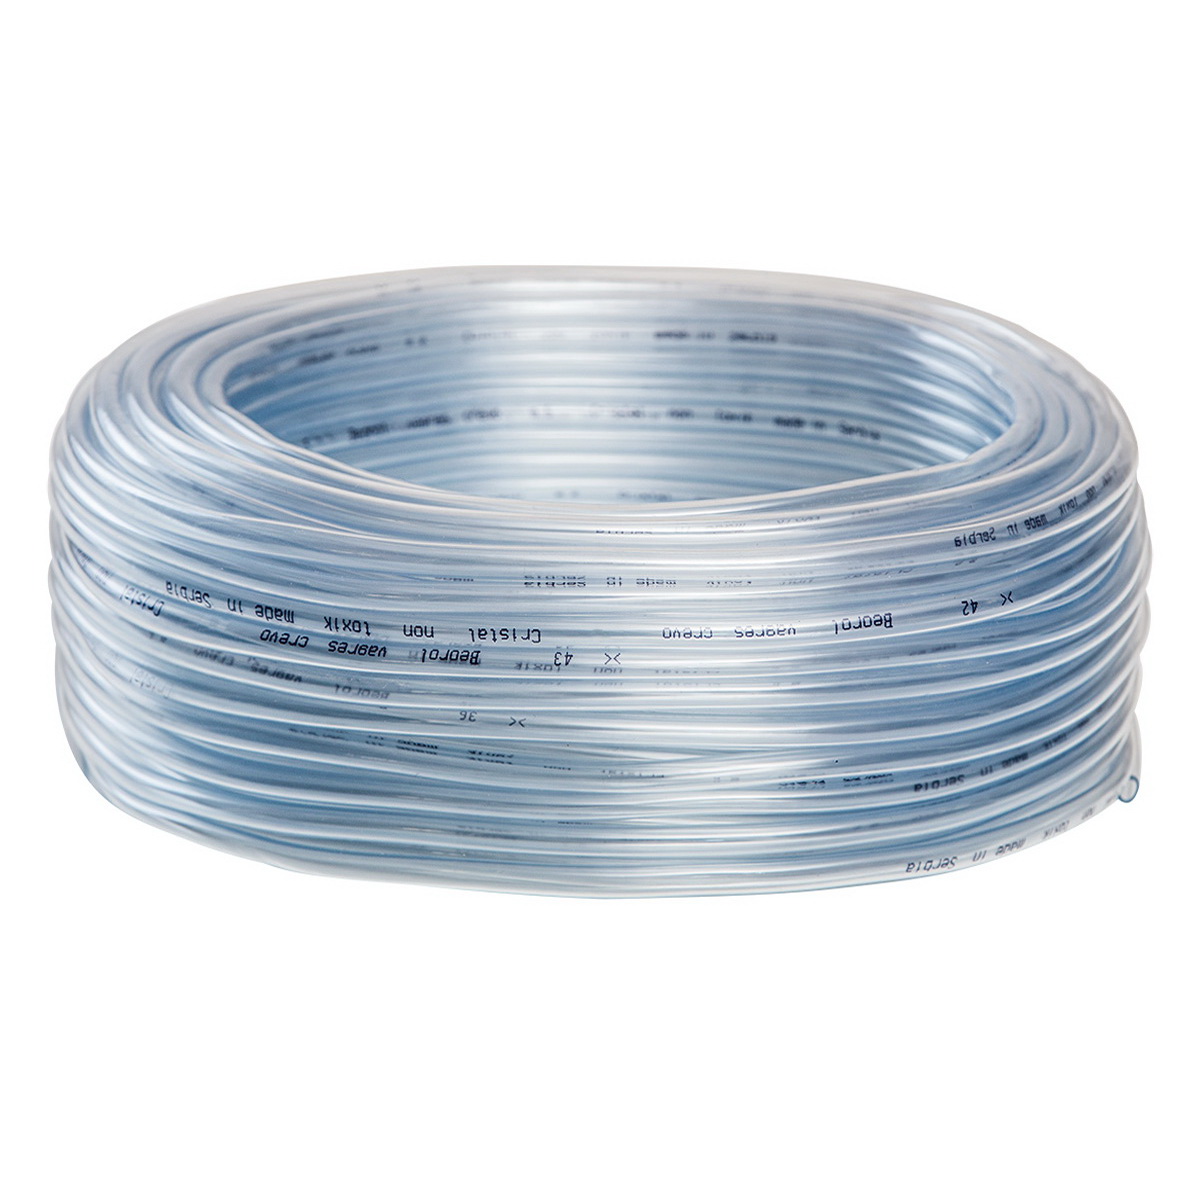 Water level hose 10mm x 50m 